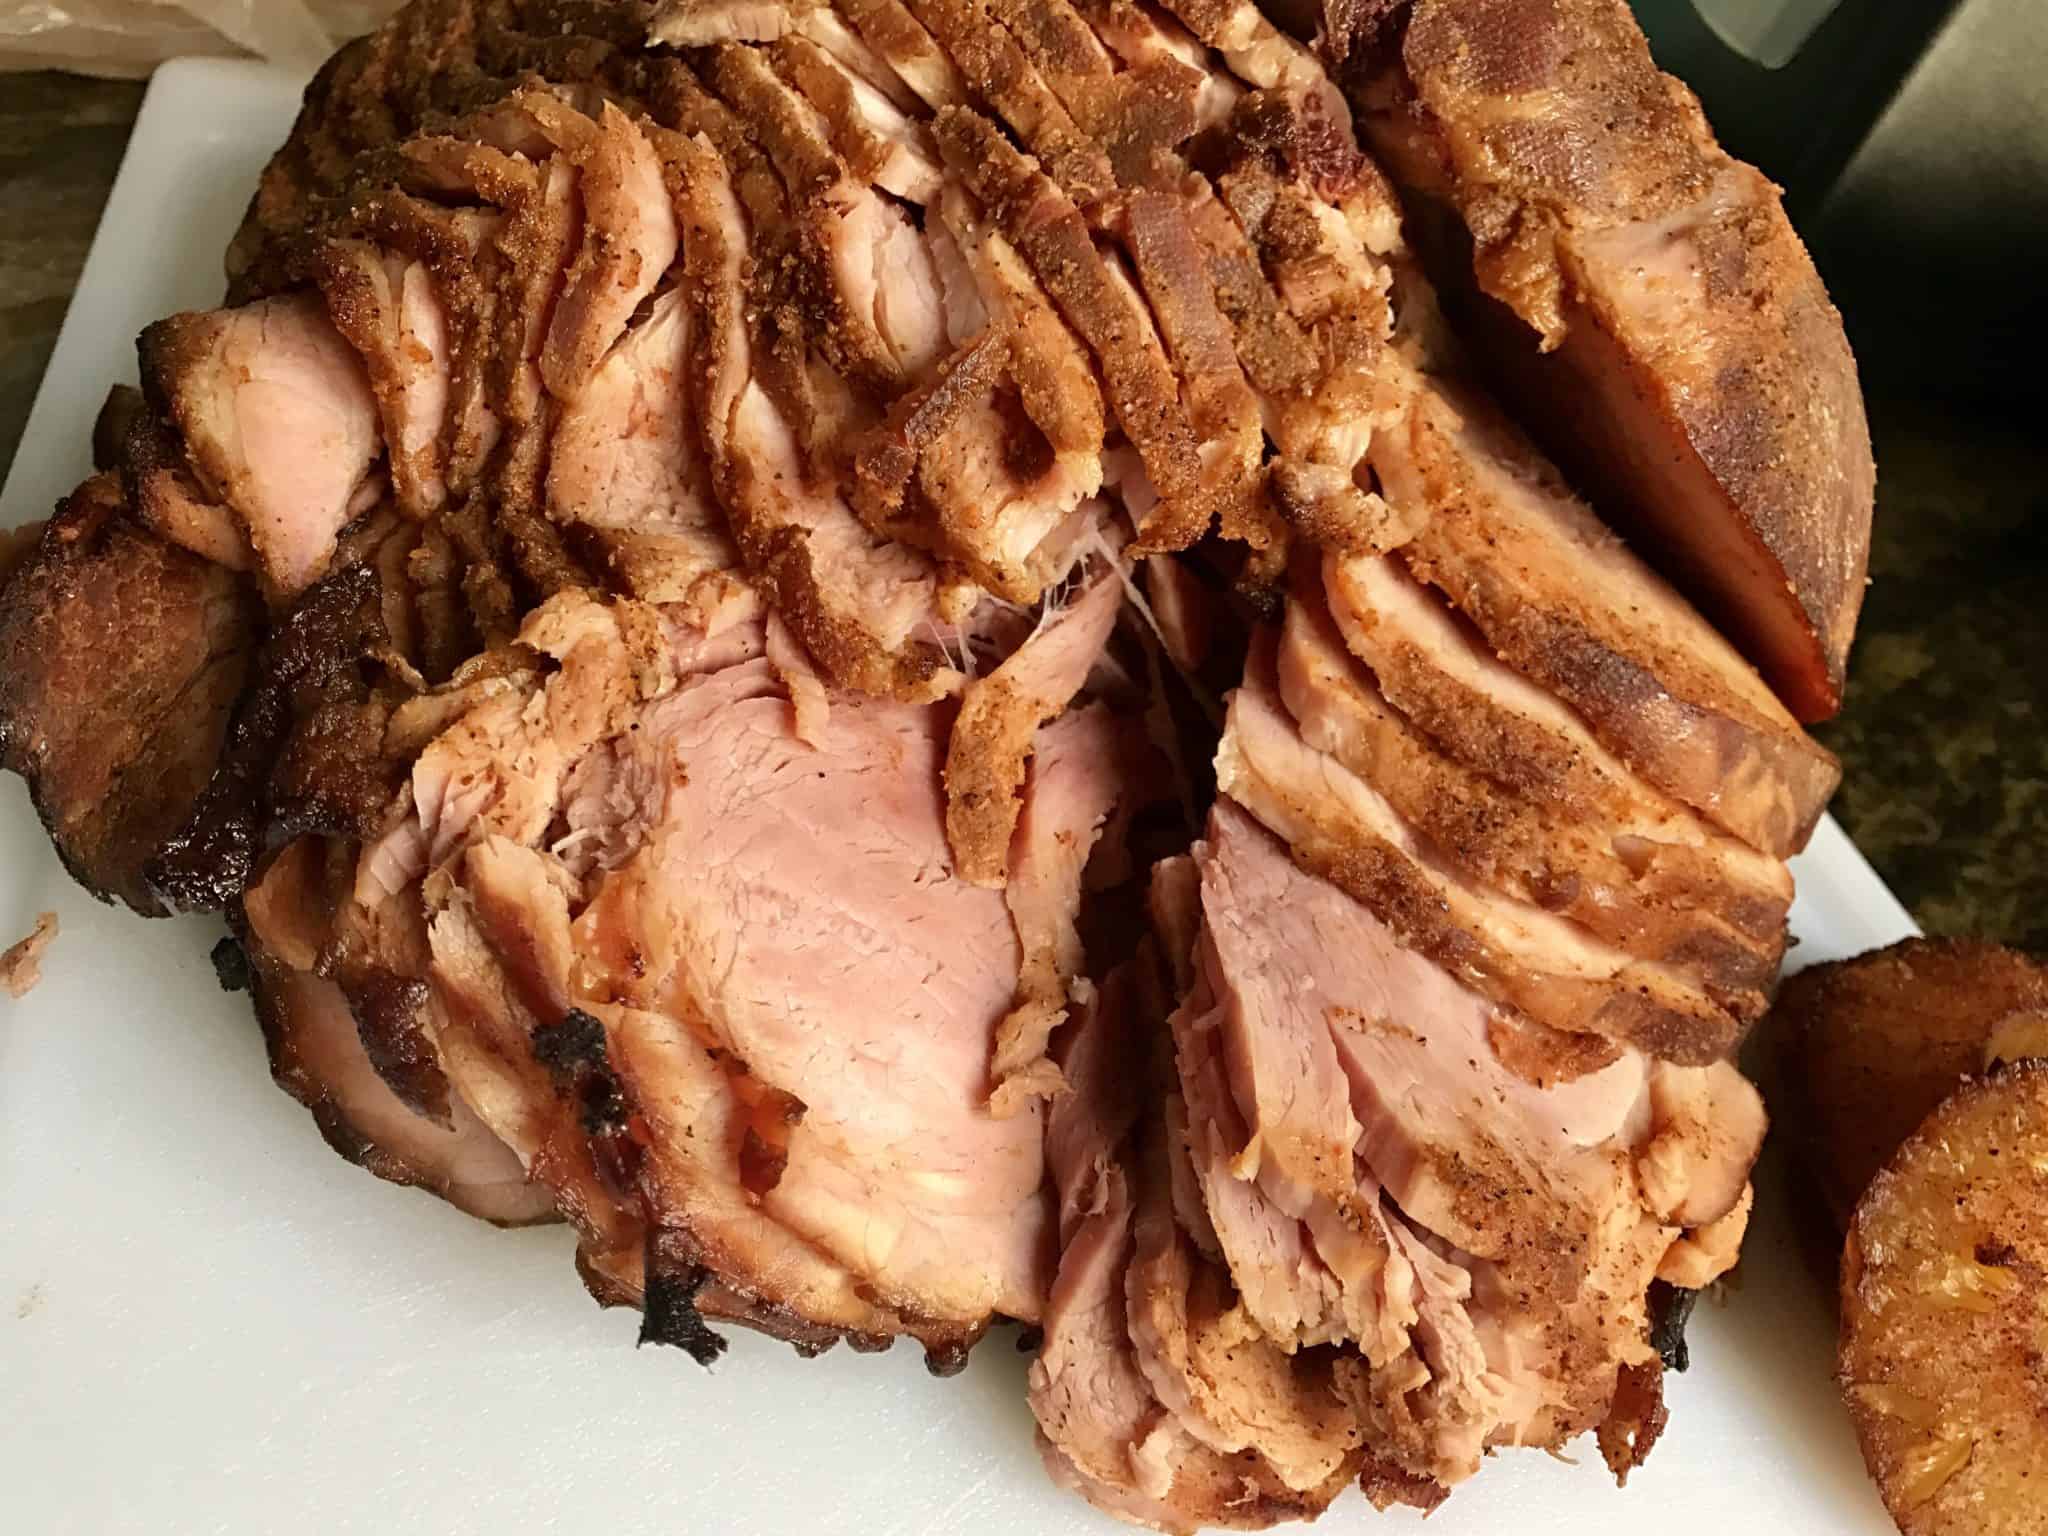 bbq smoked ham sliced and ready to be served close up view